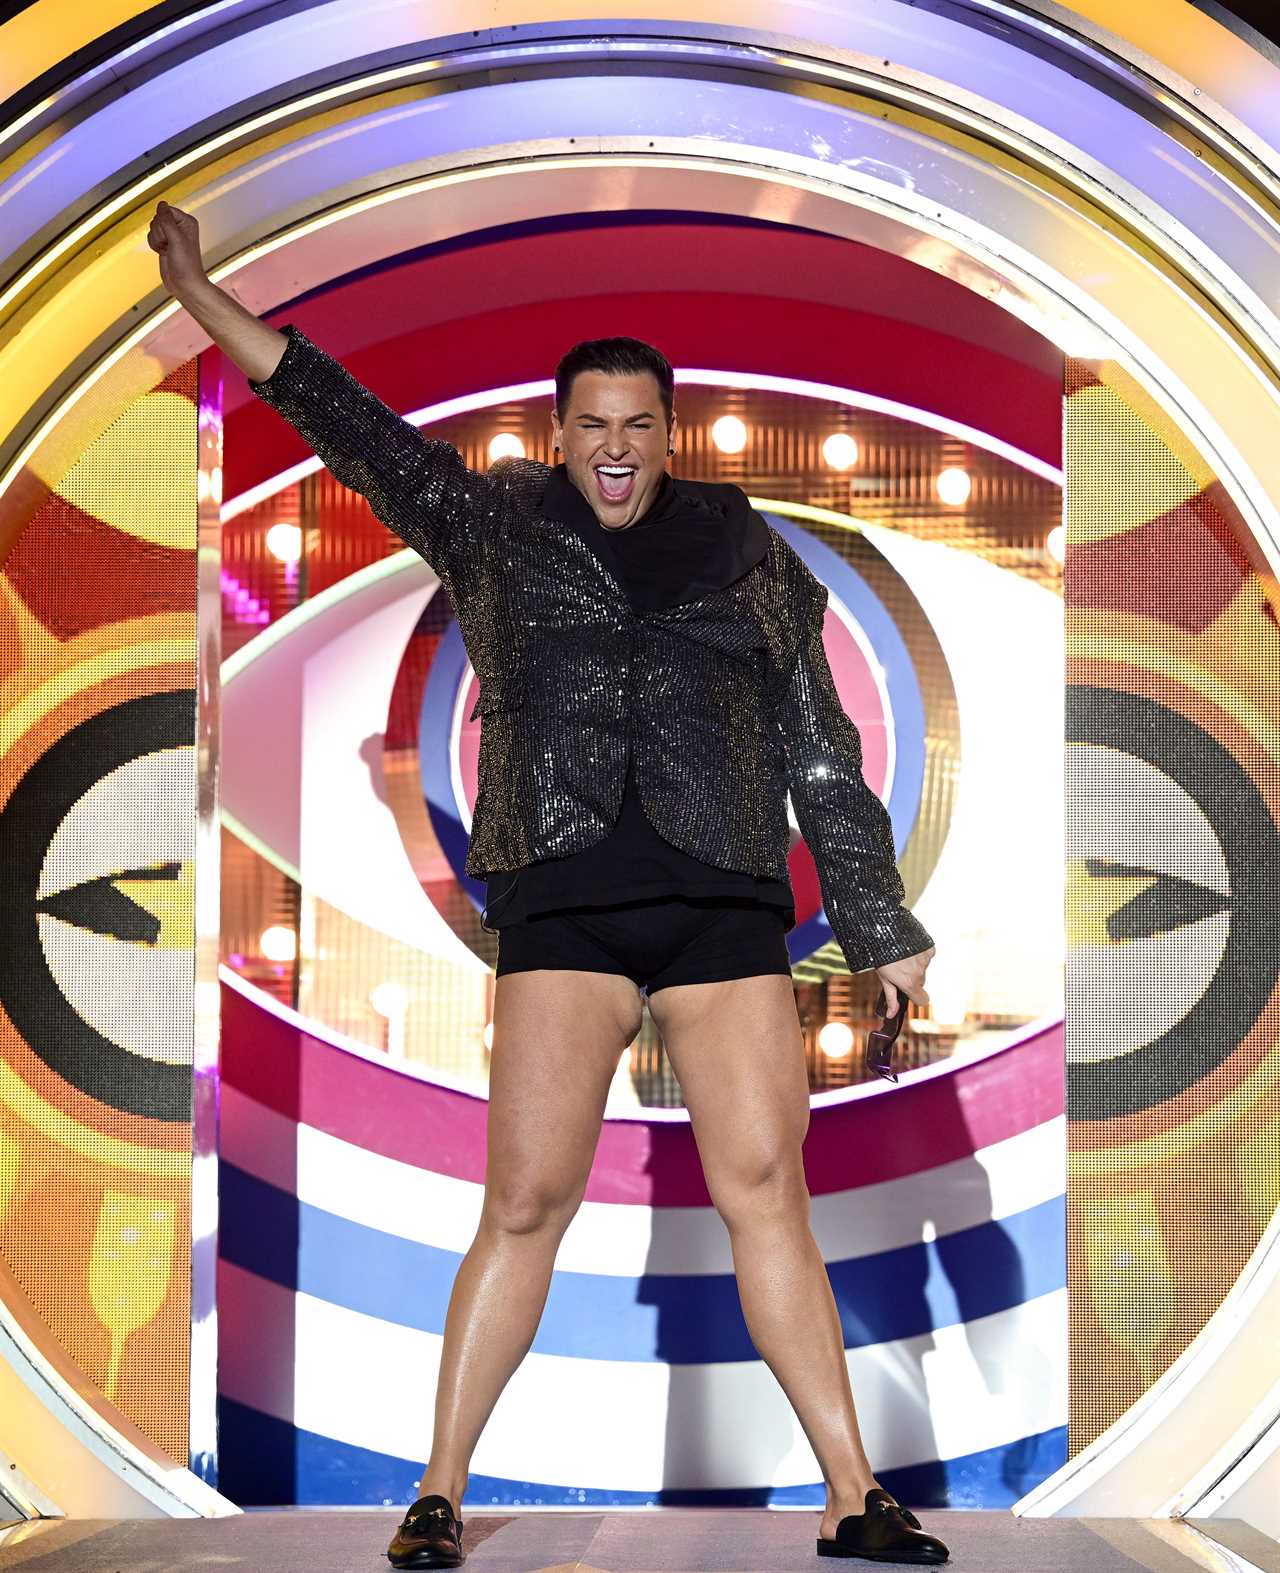 Celebrity Big Brother winner David Potts reveals who made it to the WhatsApp chat